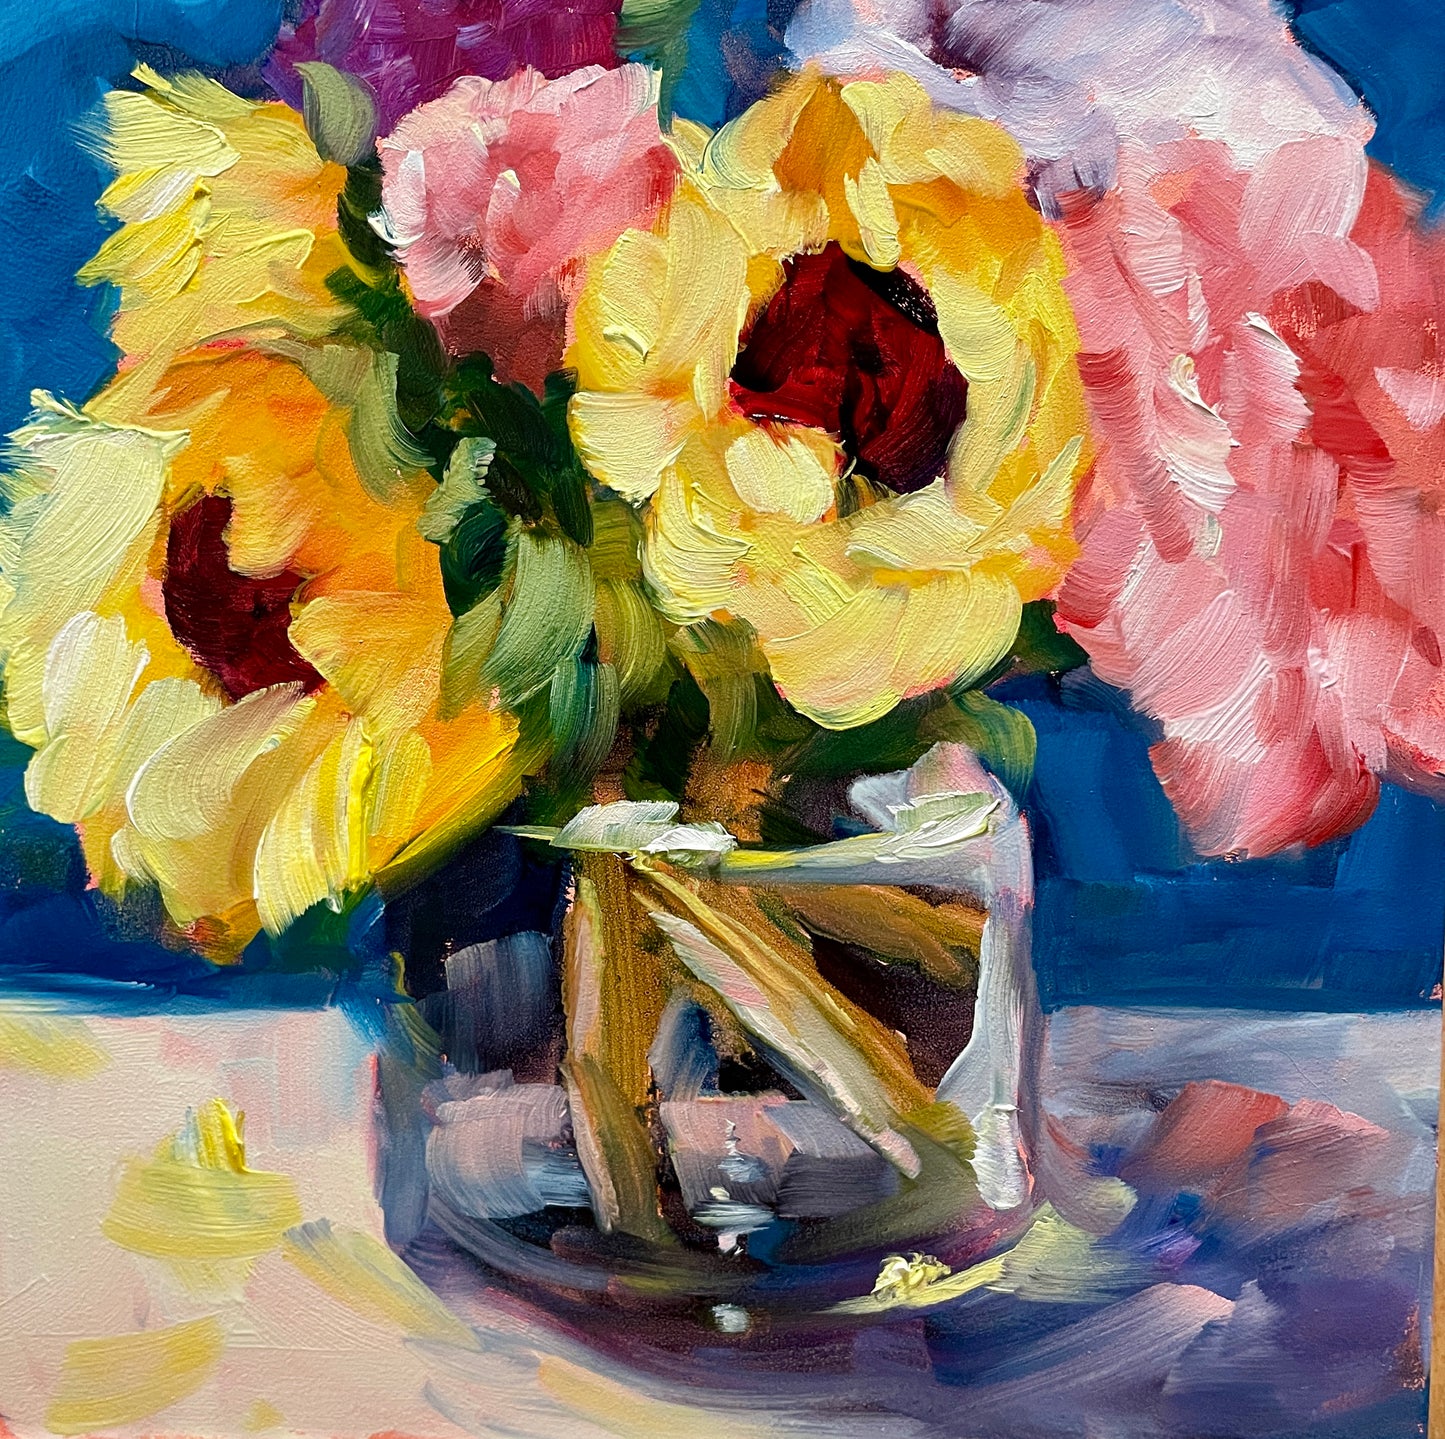 Sunflowers, Pink Carnations in Glass Vase Original Oil Painting, 6X6 Square, Unframed